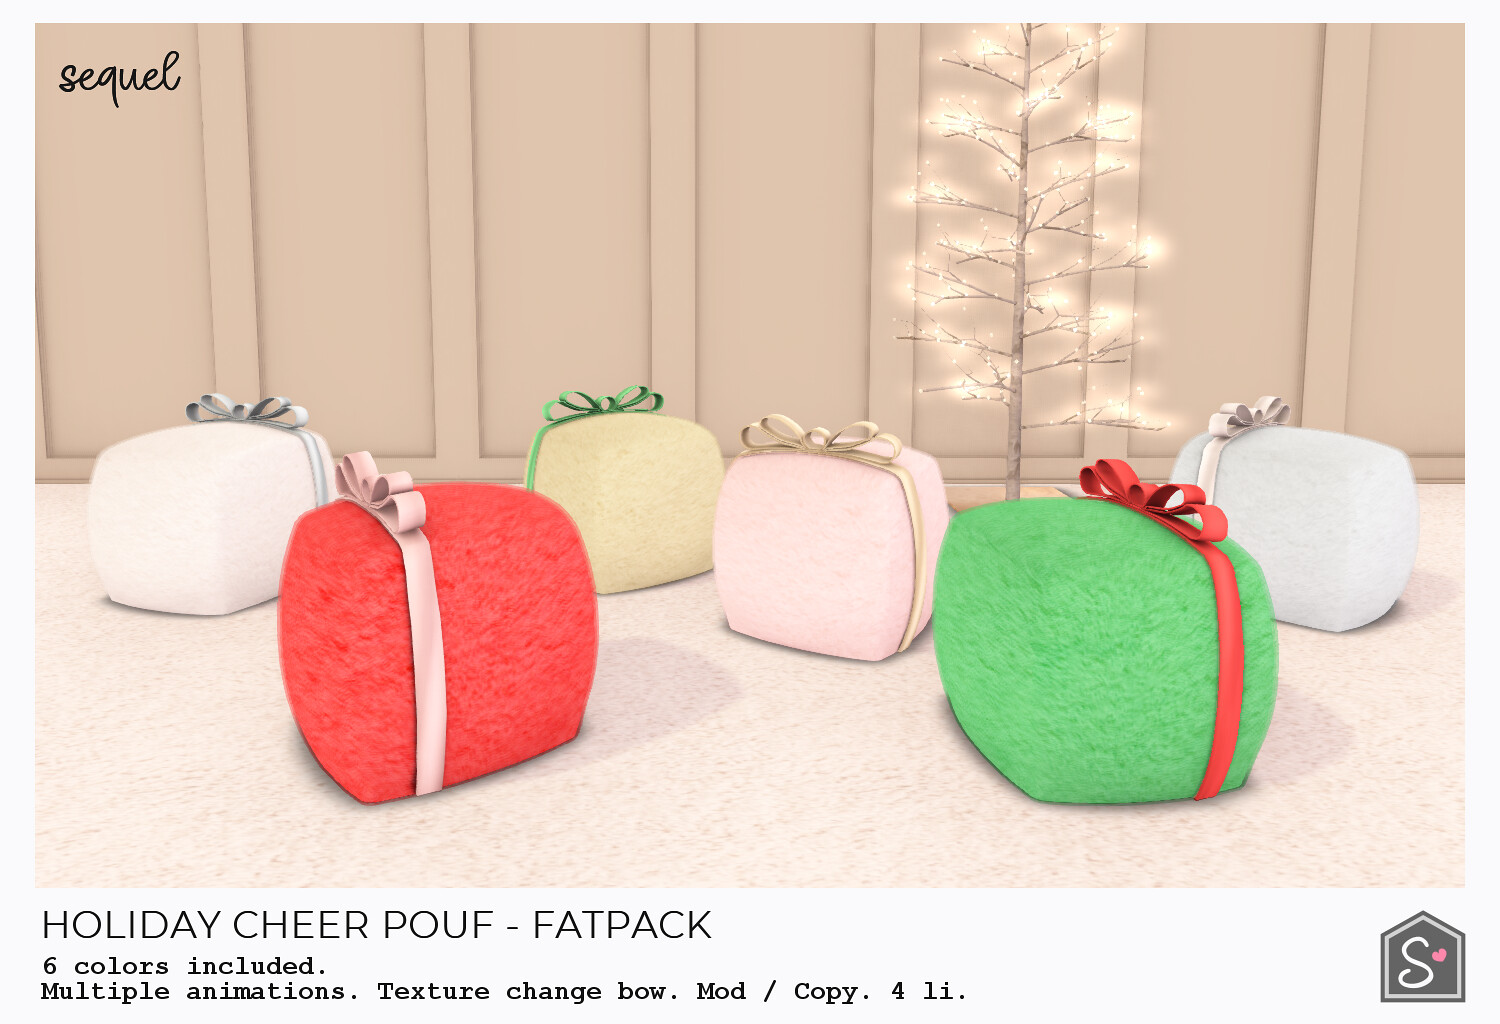 Sequel – Holiday Cheer Pouf